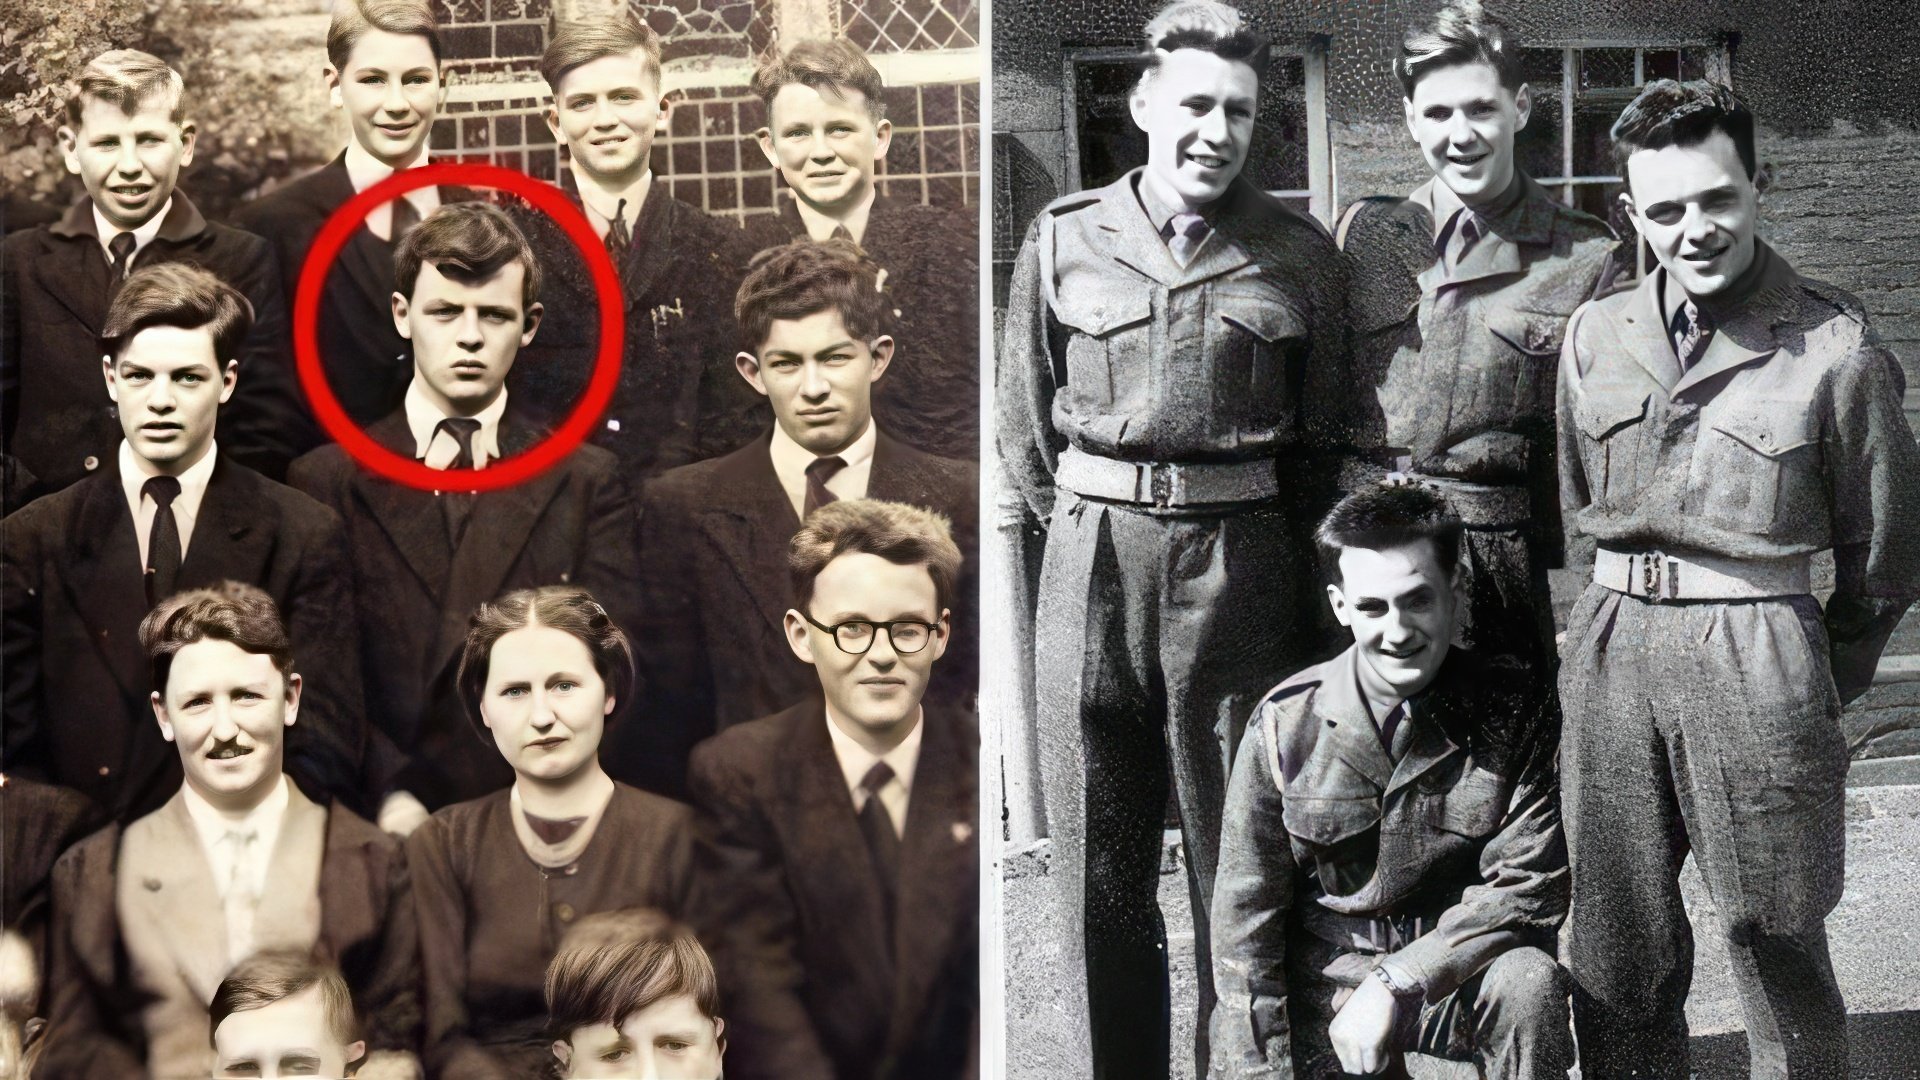 Anthony Hopkins at the Boys’ School and in the army (from the right)